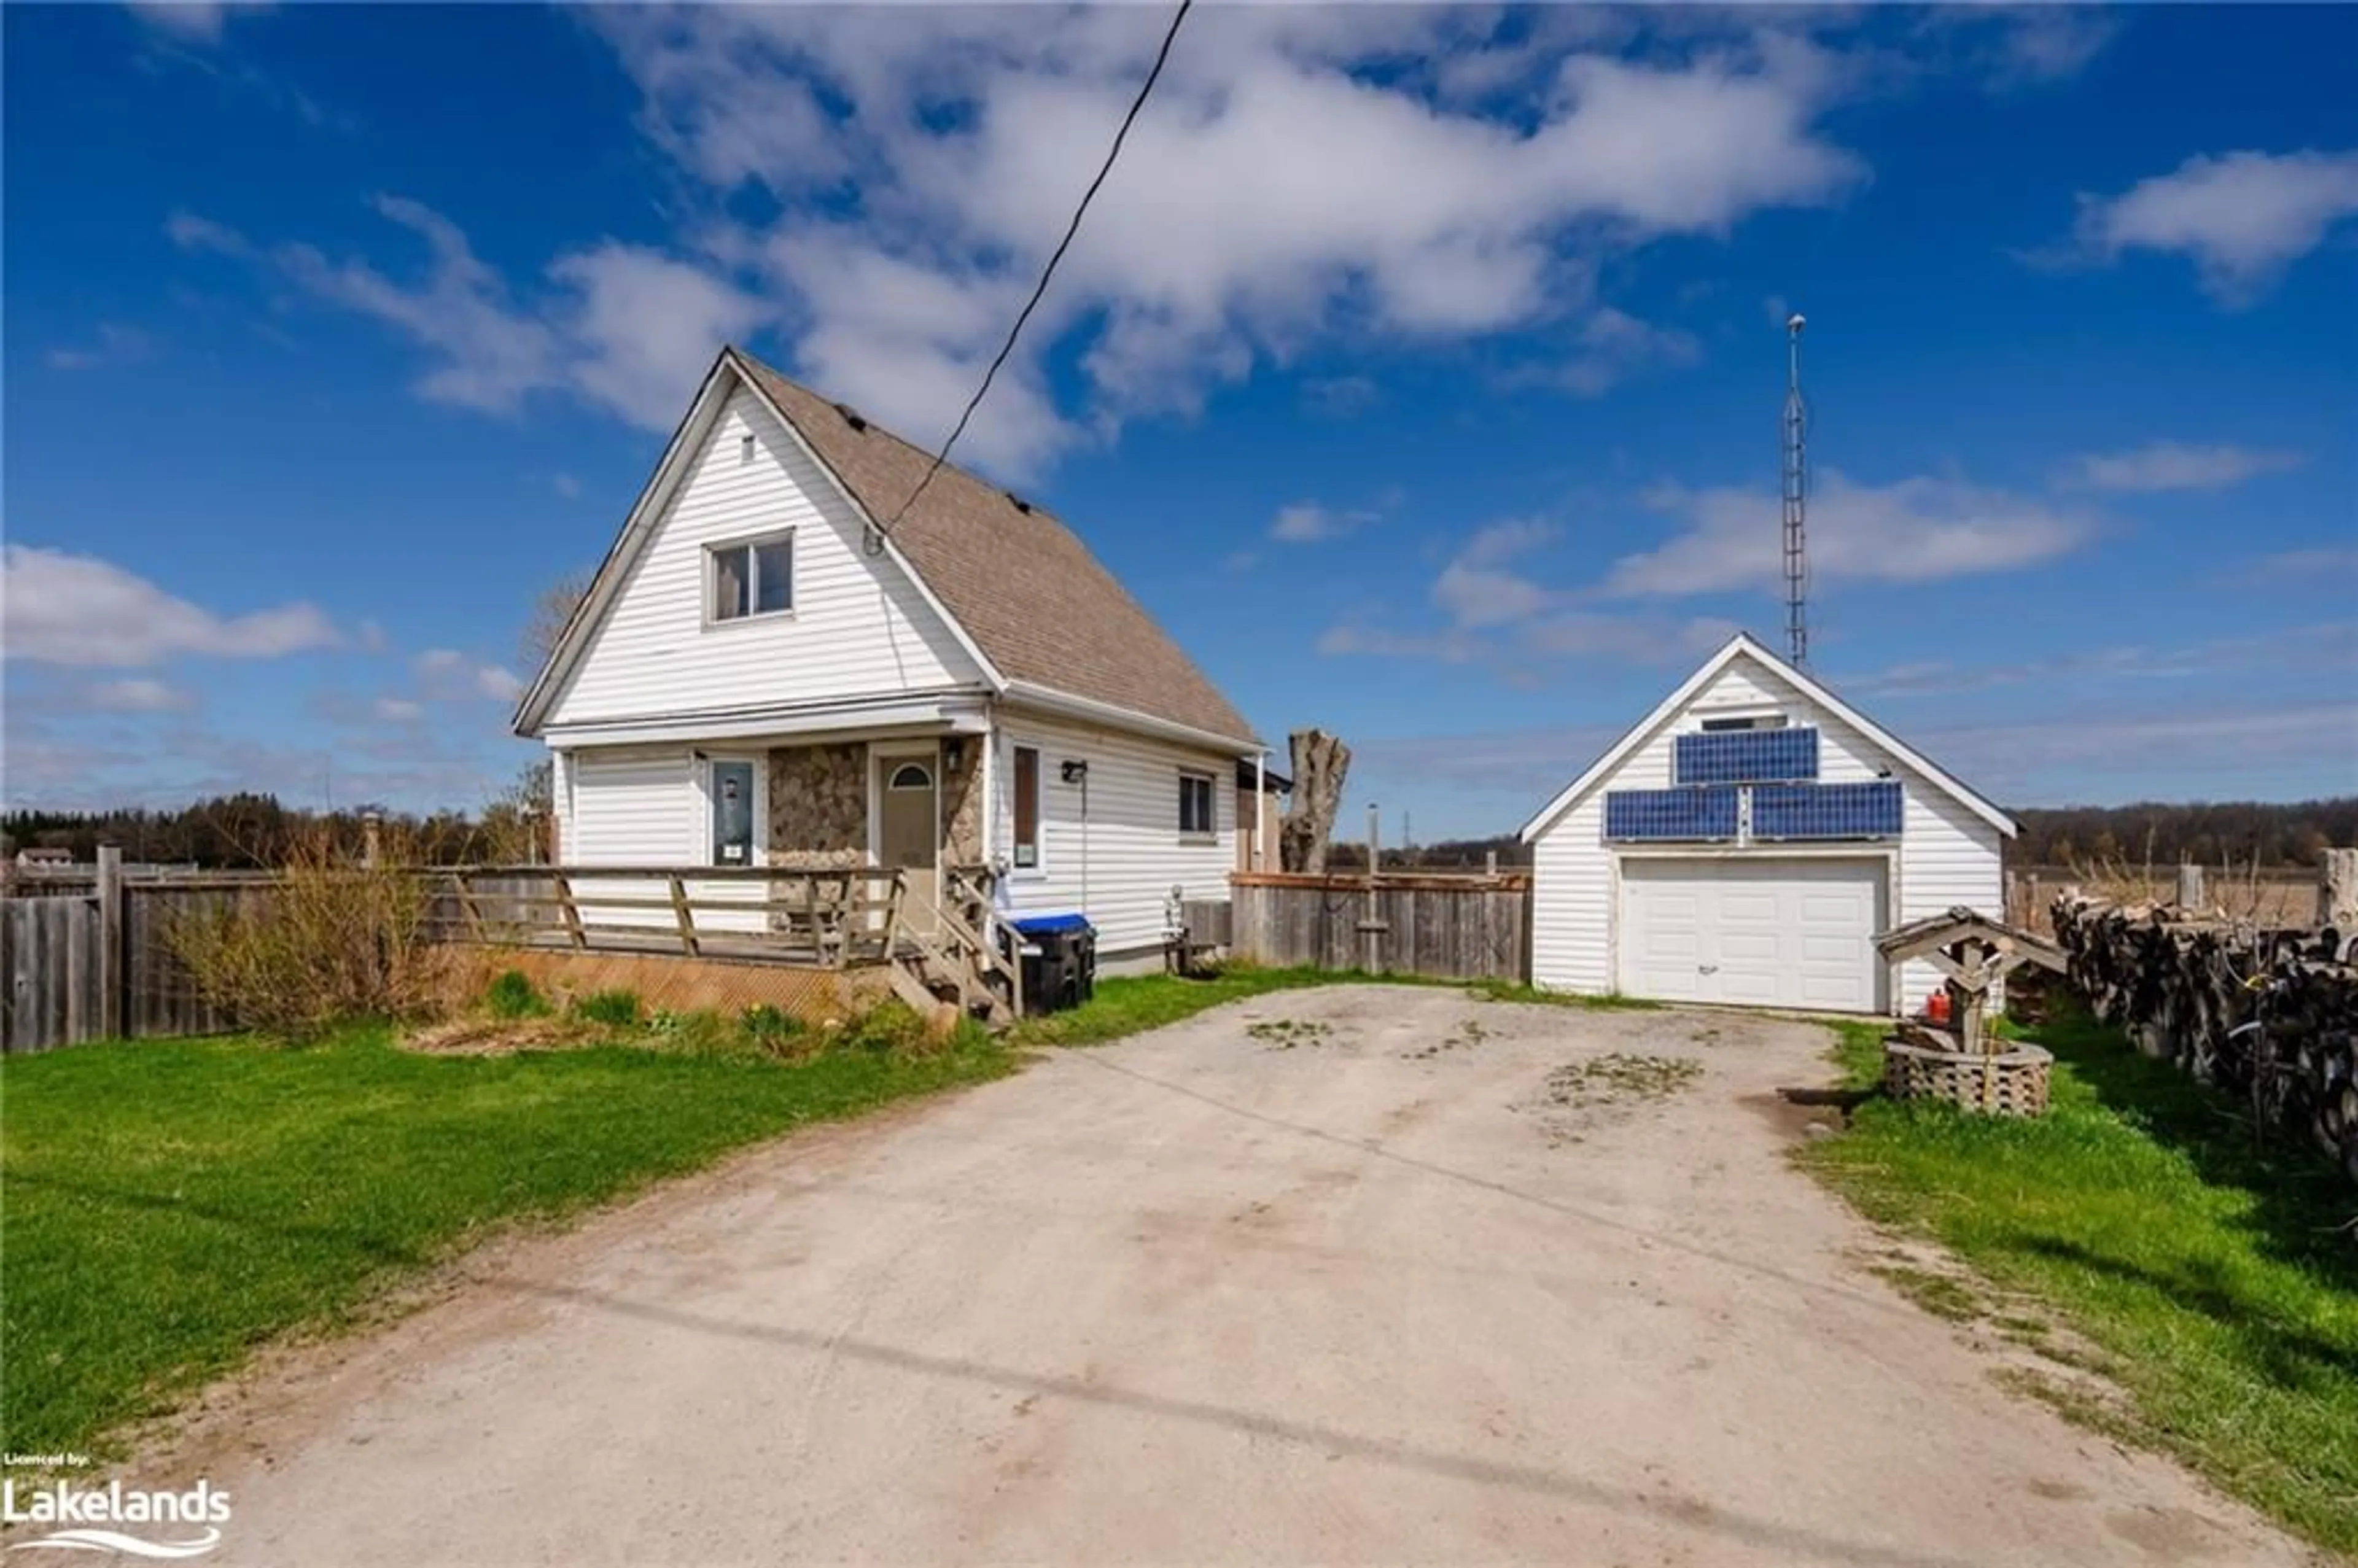 Frontside or backside of a home for 6336 County Road 90, Angus Ontario L0M 1B4